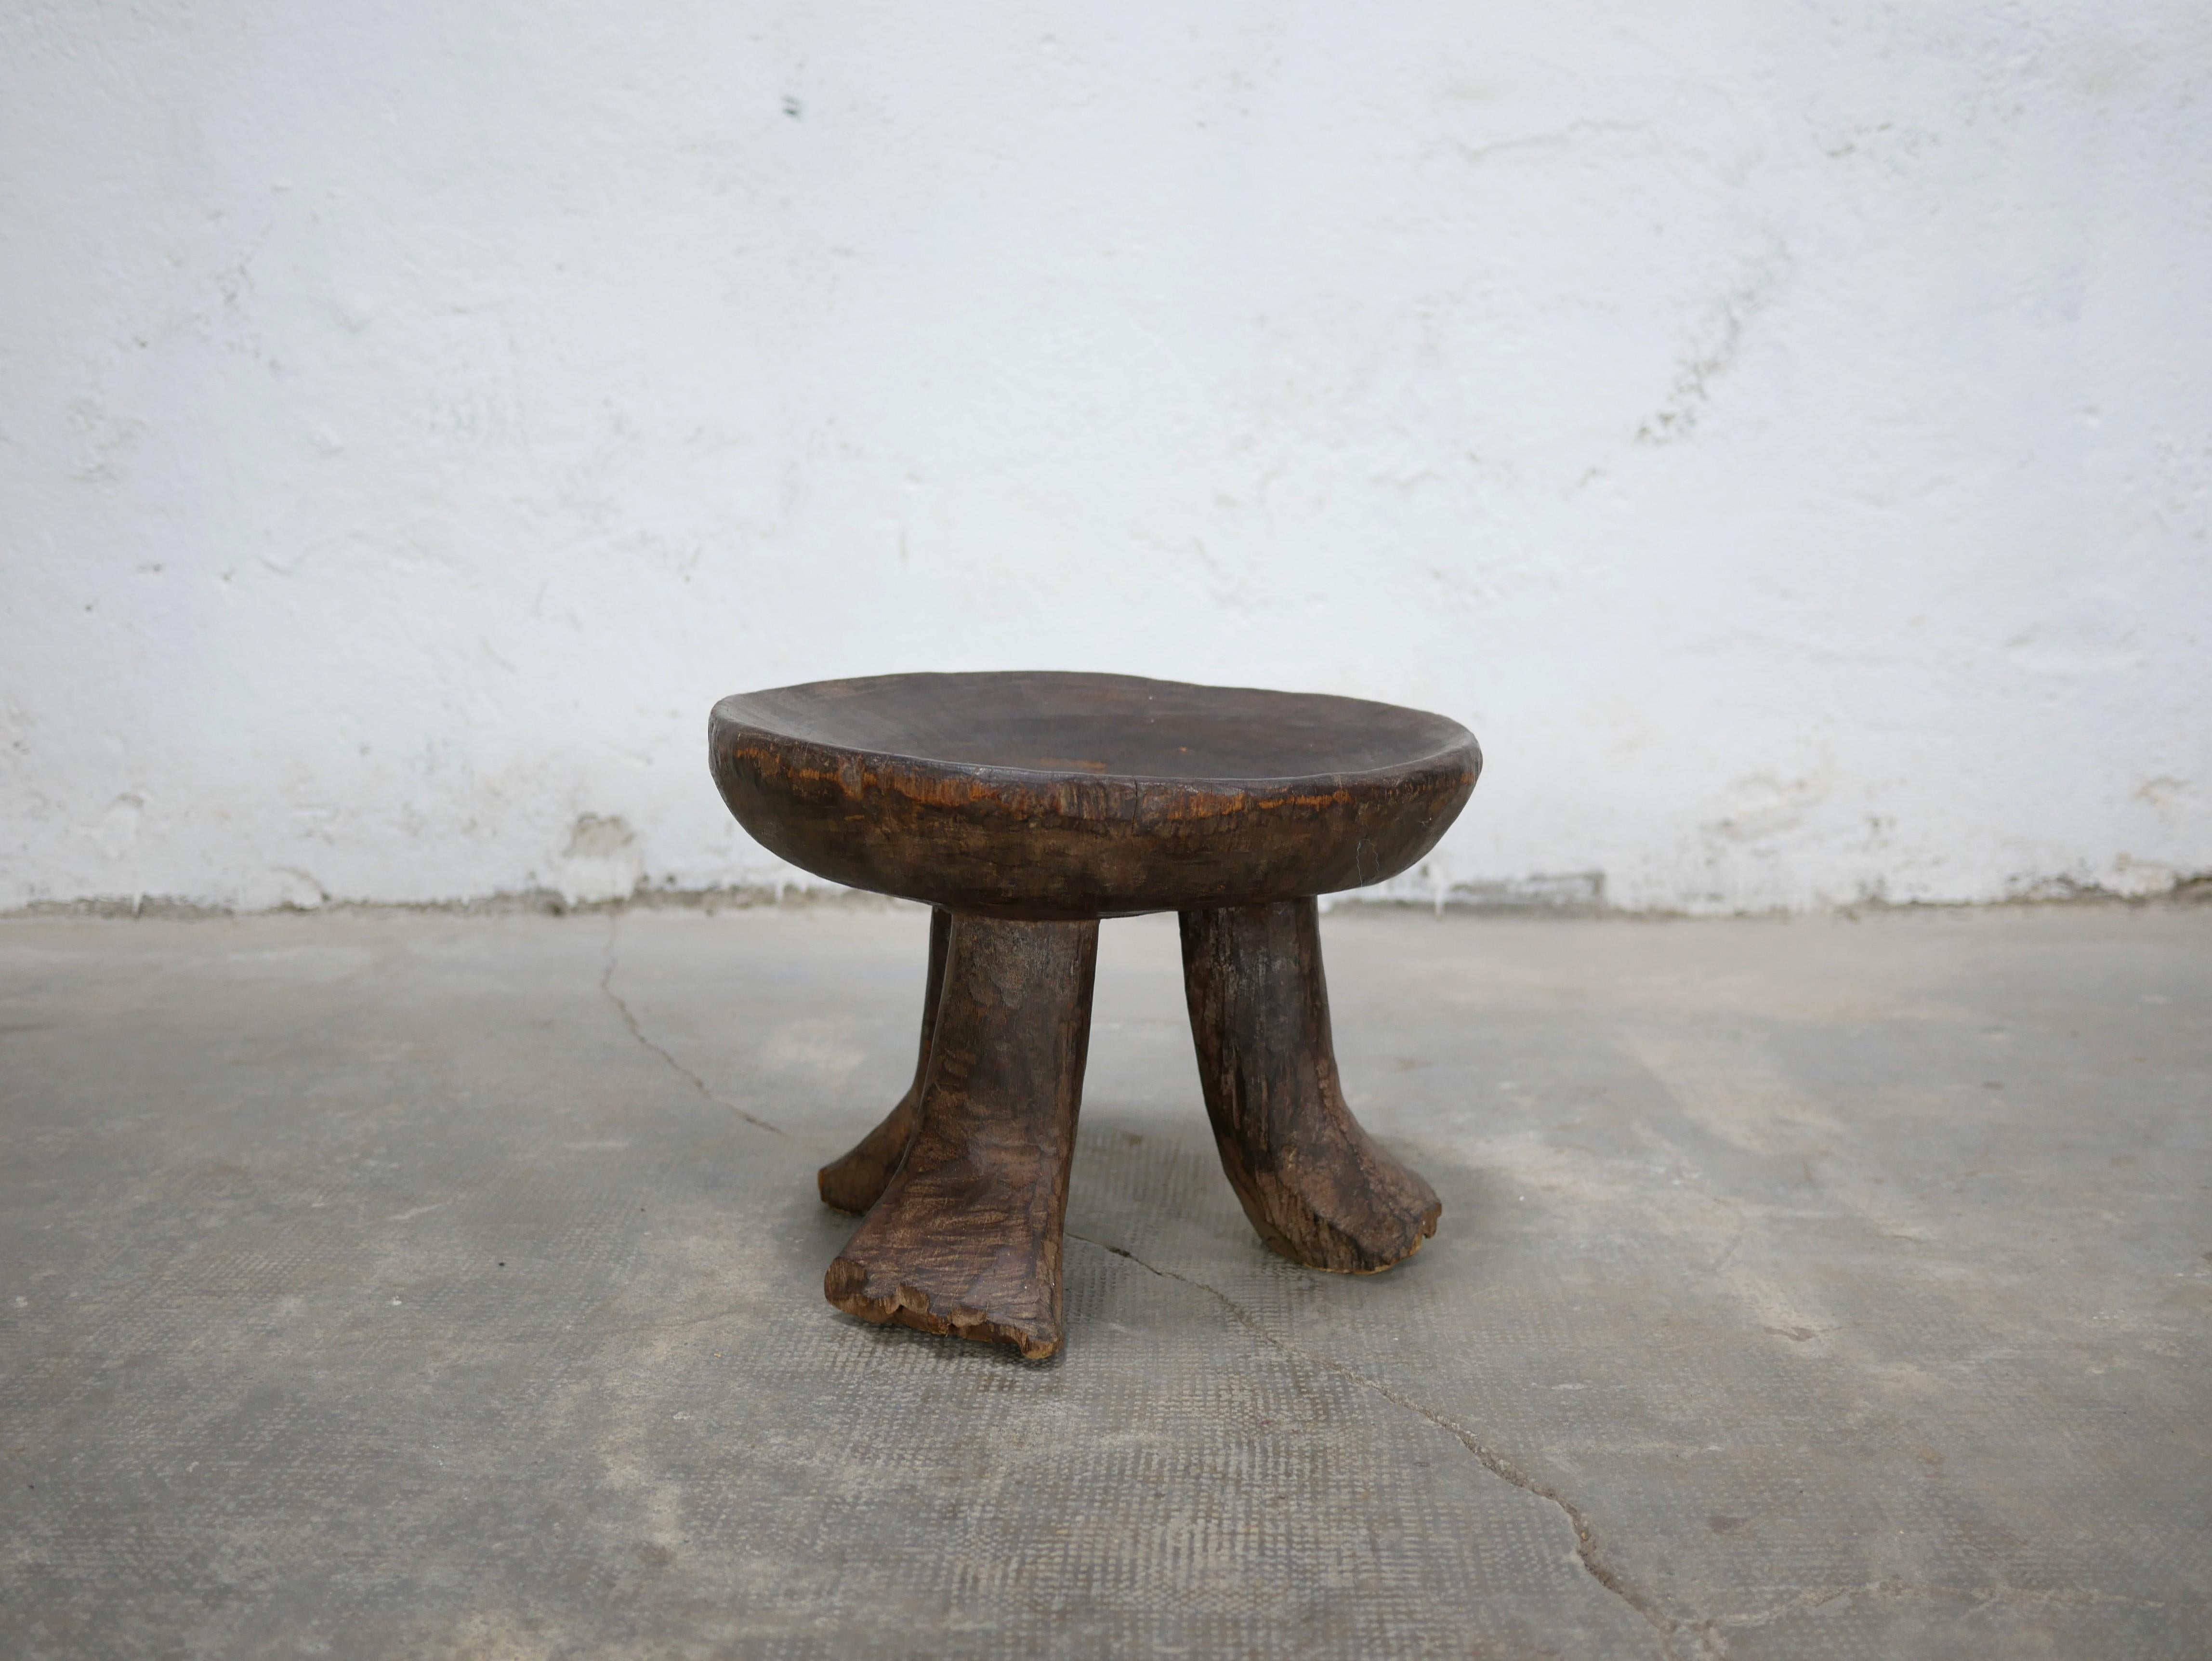 Wooden tripod stool from Ethiopia. African primitive art, first half of the 20th century.

Aesthetic and authentic, the small stool will be perfect in a refined, natural and modern decoration. Its raw material and simple lines give it a lot of